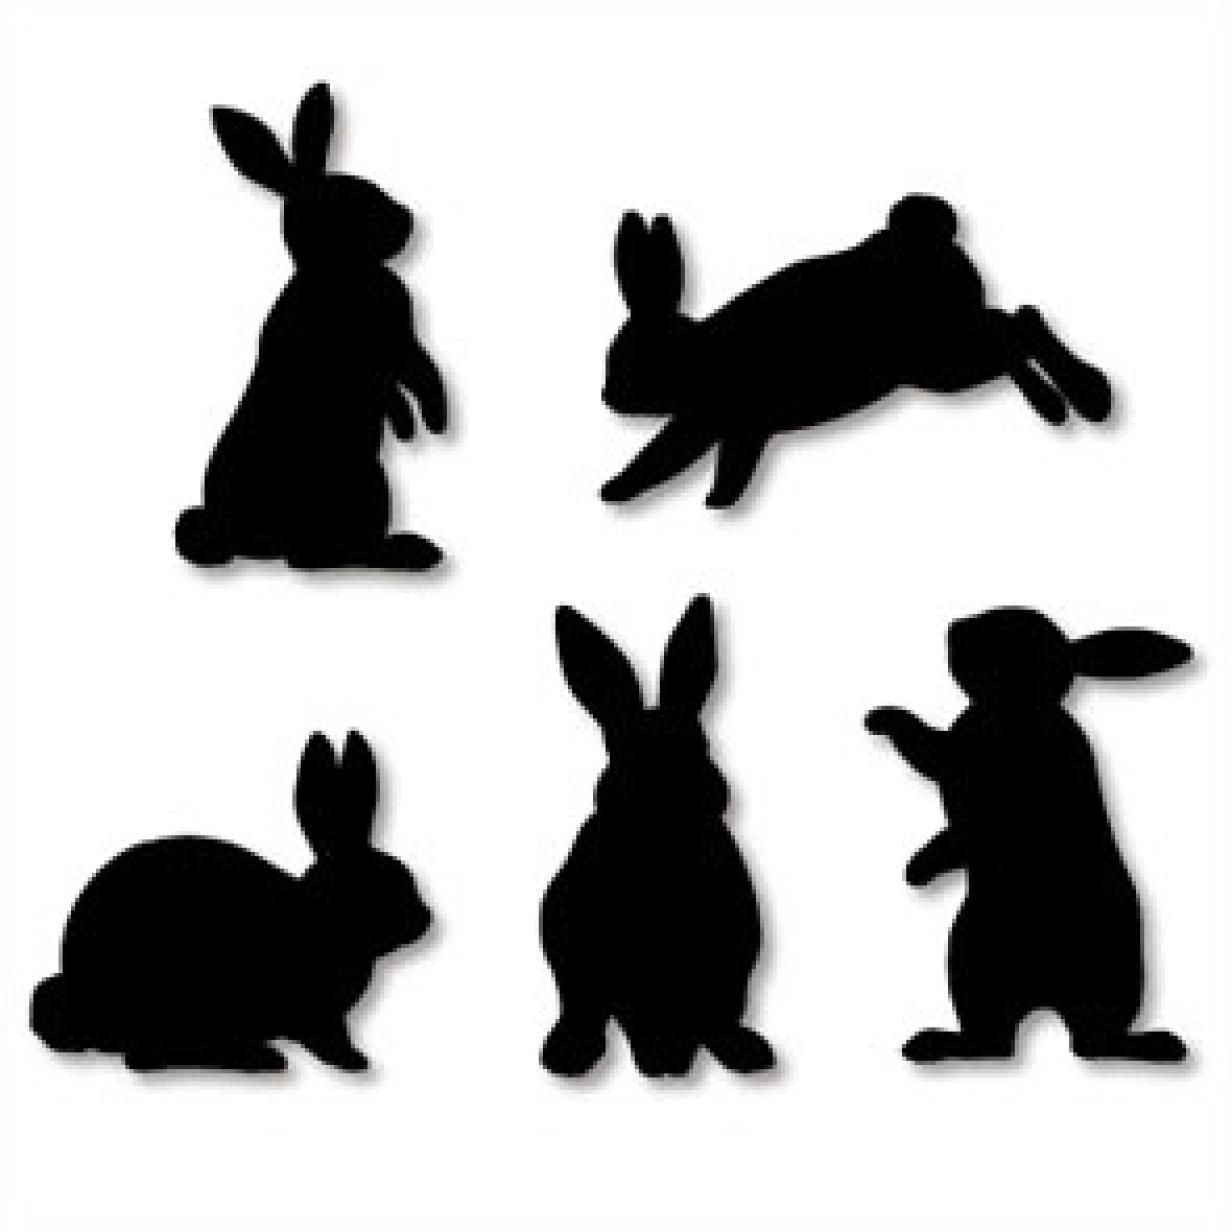 Bunny Papercraft Wall Decorations Rabbit Home and Living Paper Craft Rabbit